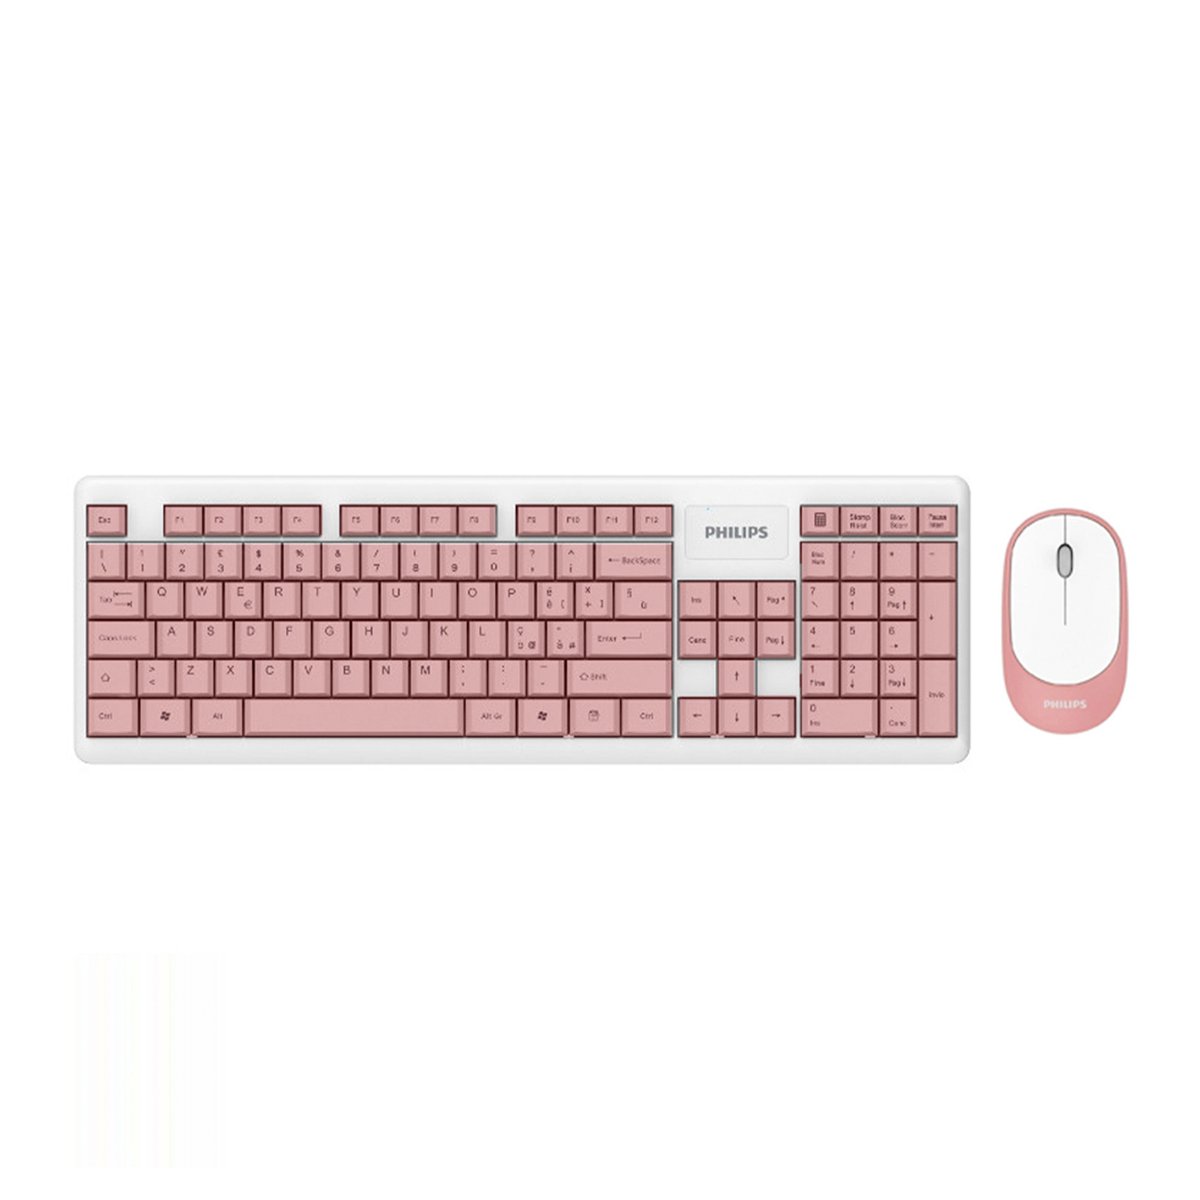 Philips Wireless Keyboard & Mouse Combo, Pink Colour